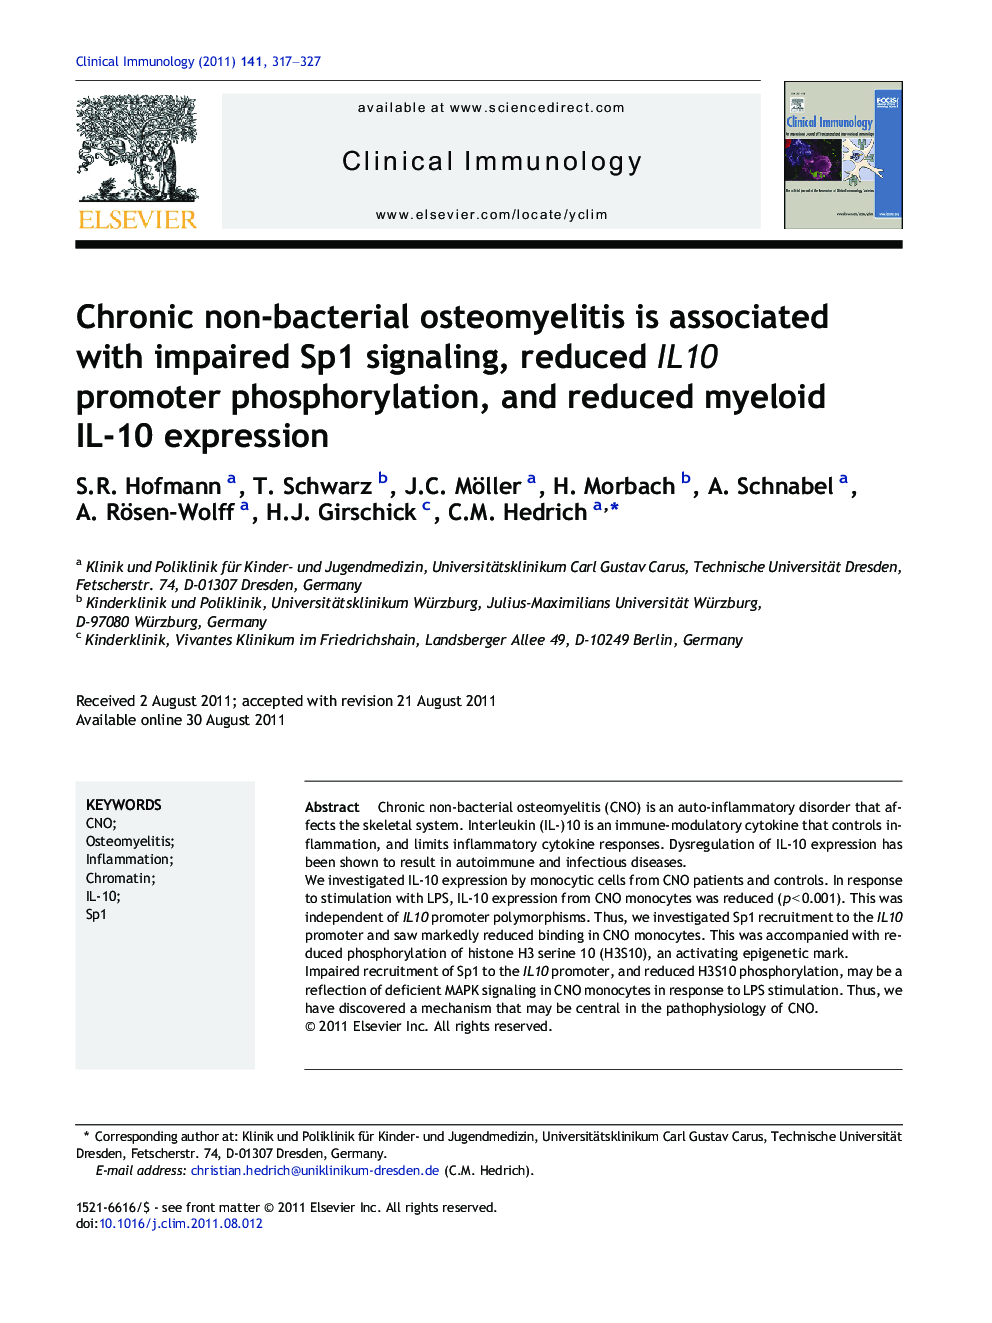 Chronic non-bacterial osteomyelitis is associated with impaired Sp1 signaling, reduced IL10 promoter phosphorylation, and reduced myeloid IL-10 expression